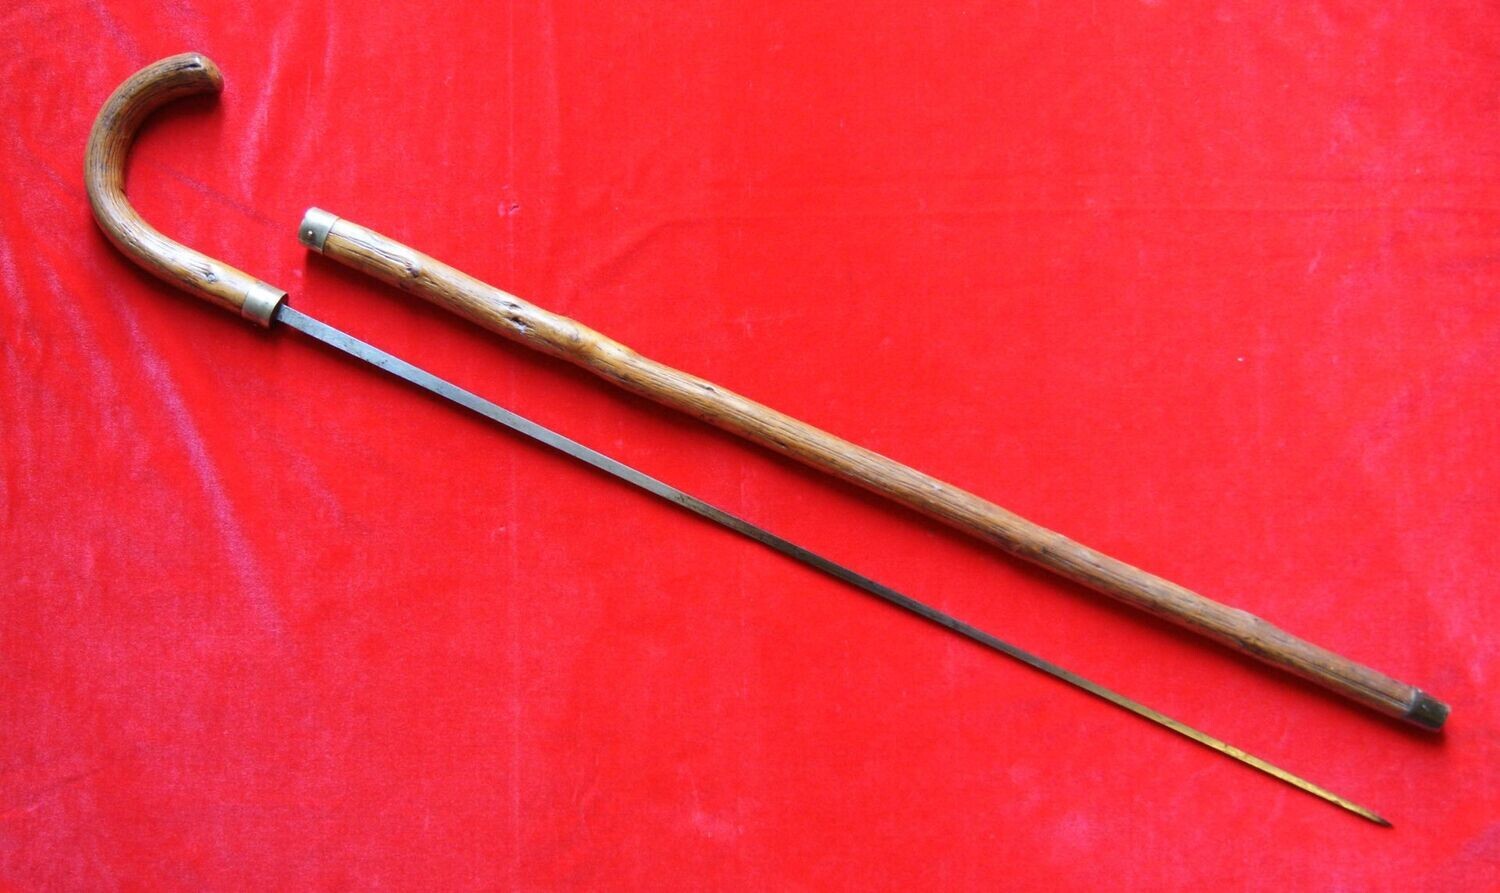 ​19th Century Customs & Excise Rummage Stick by Mole